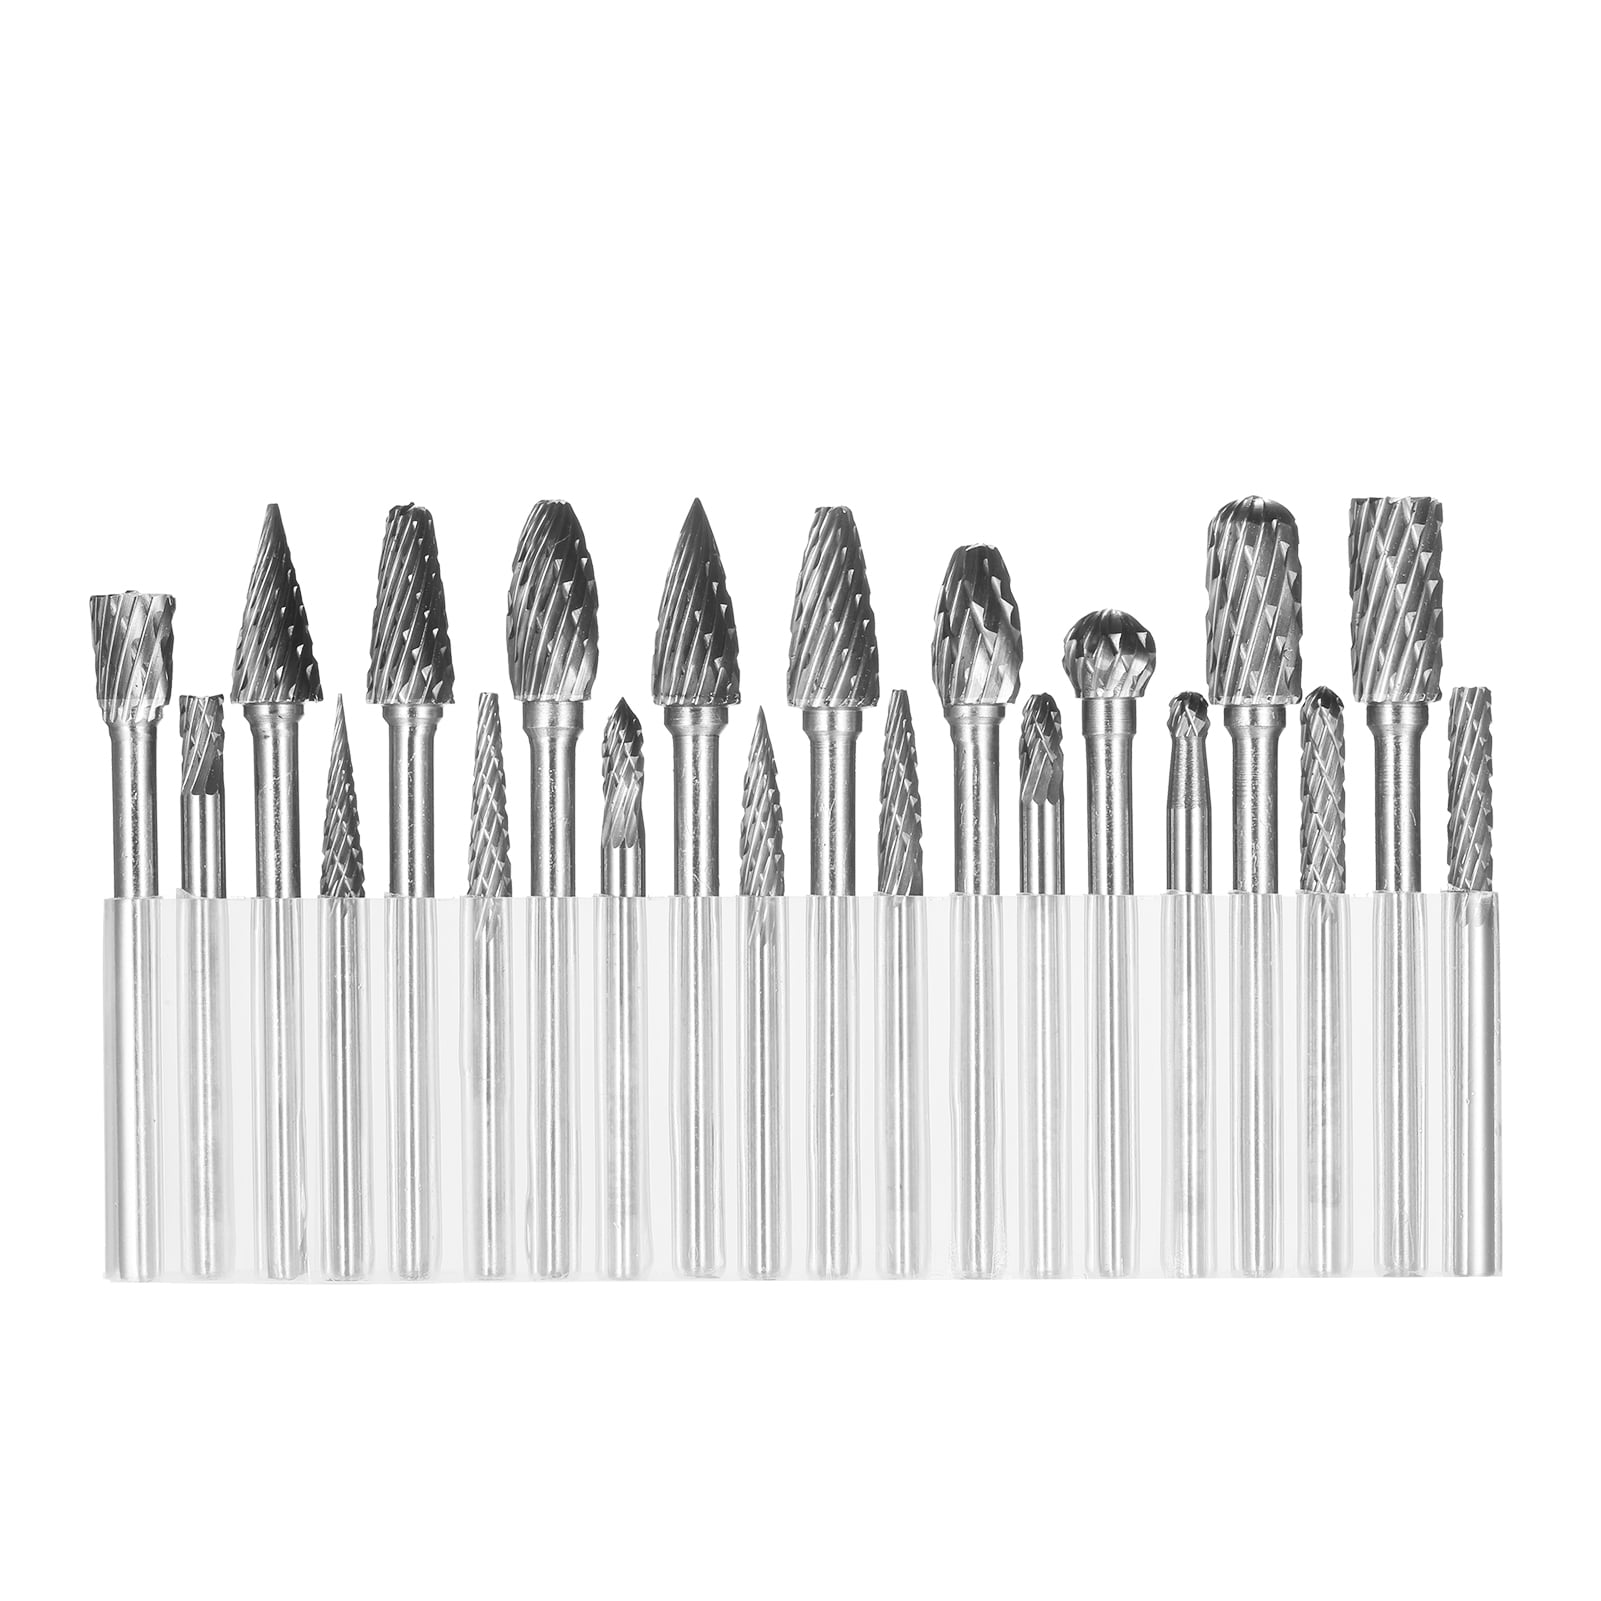 Carbide burs Double Cut Rotary Cutters Pointy Cone-Shaped Cutters with 1/8 inch Shank and 1/8 inch Head Size for die Cutters 2 Pieces 